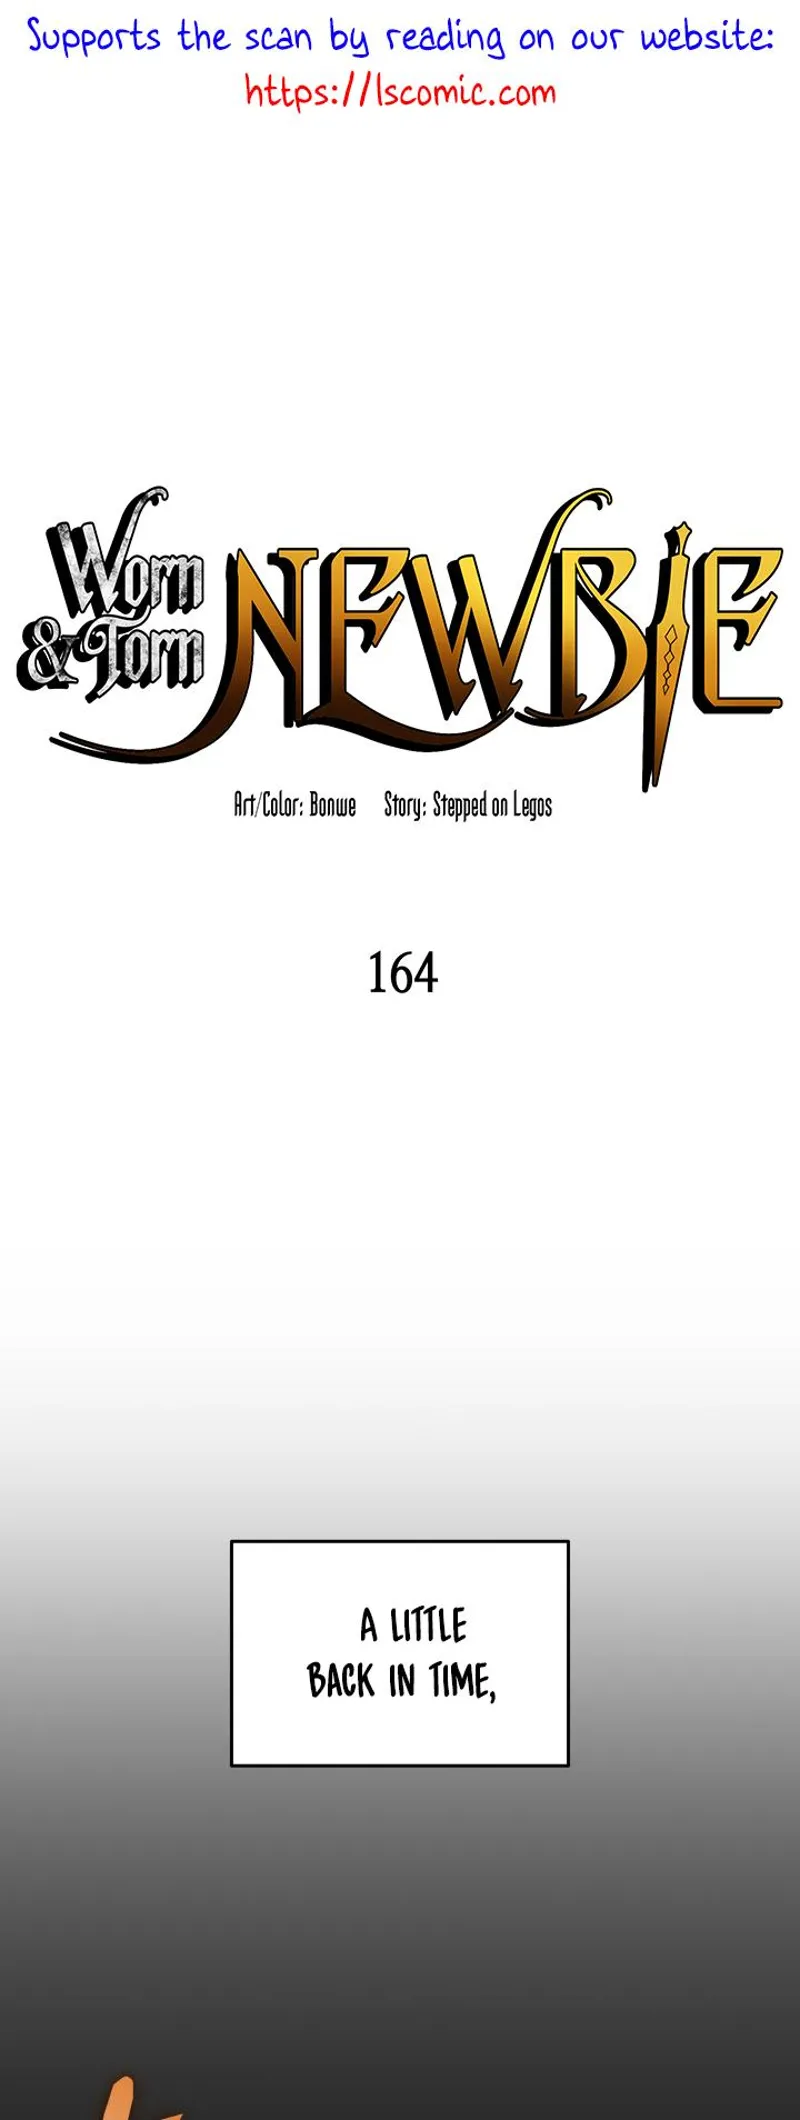 The Worn and Torn Newbie chapter 164